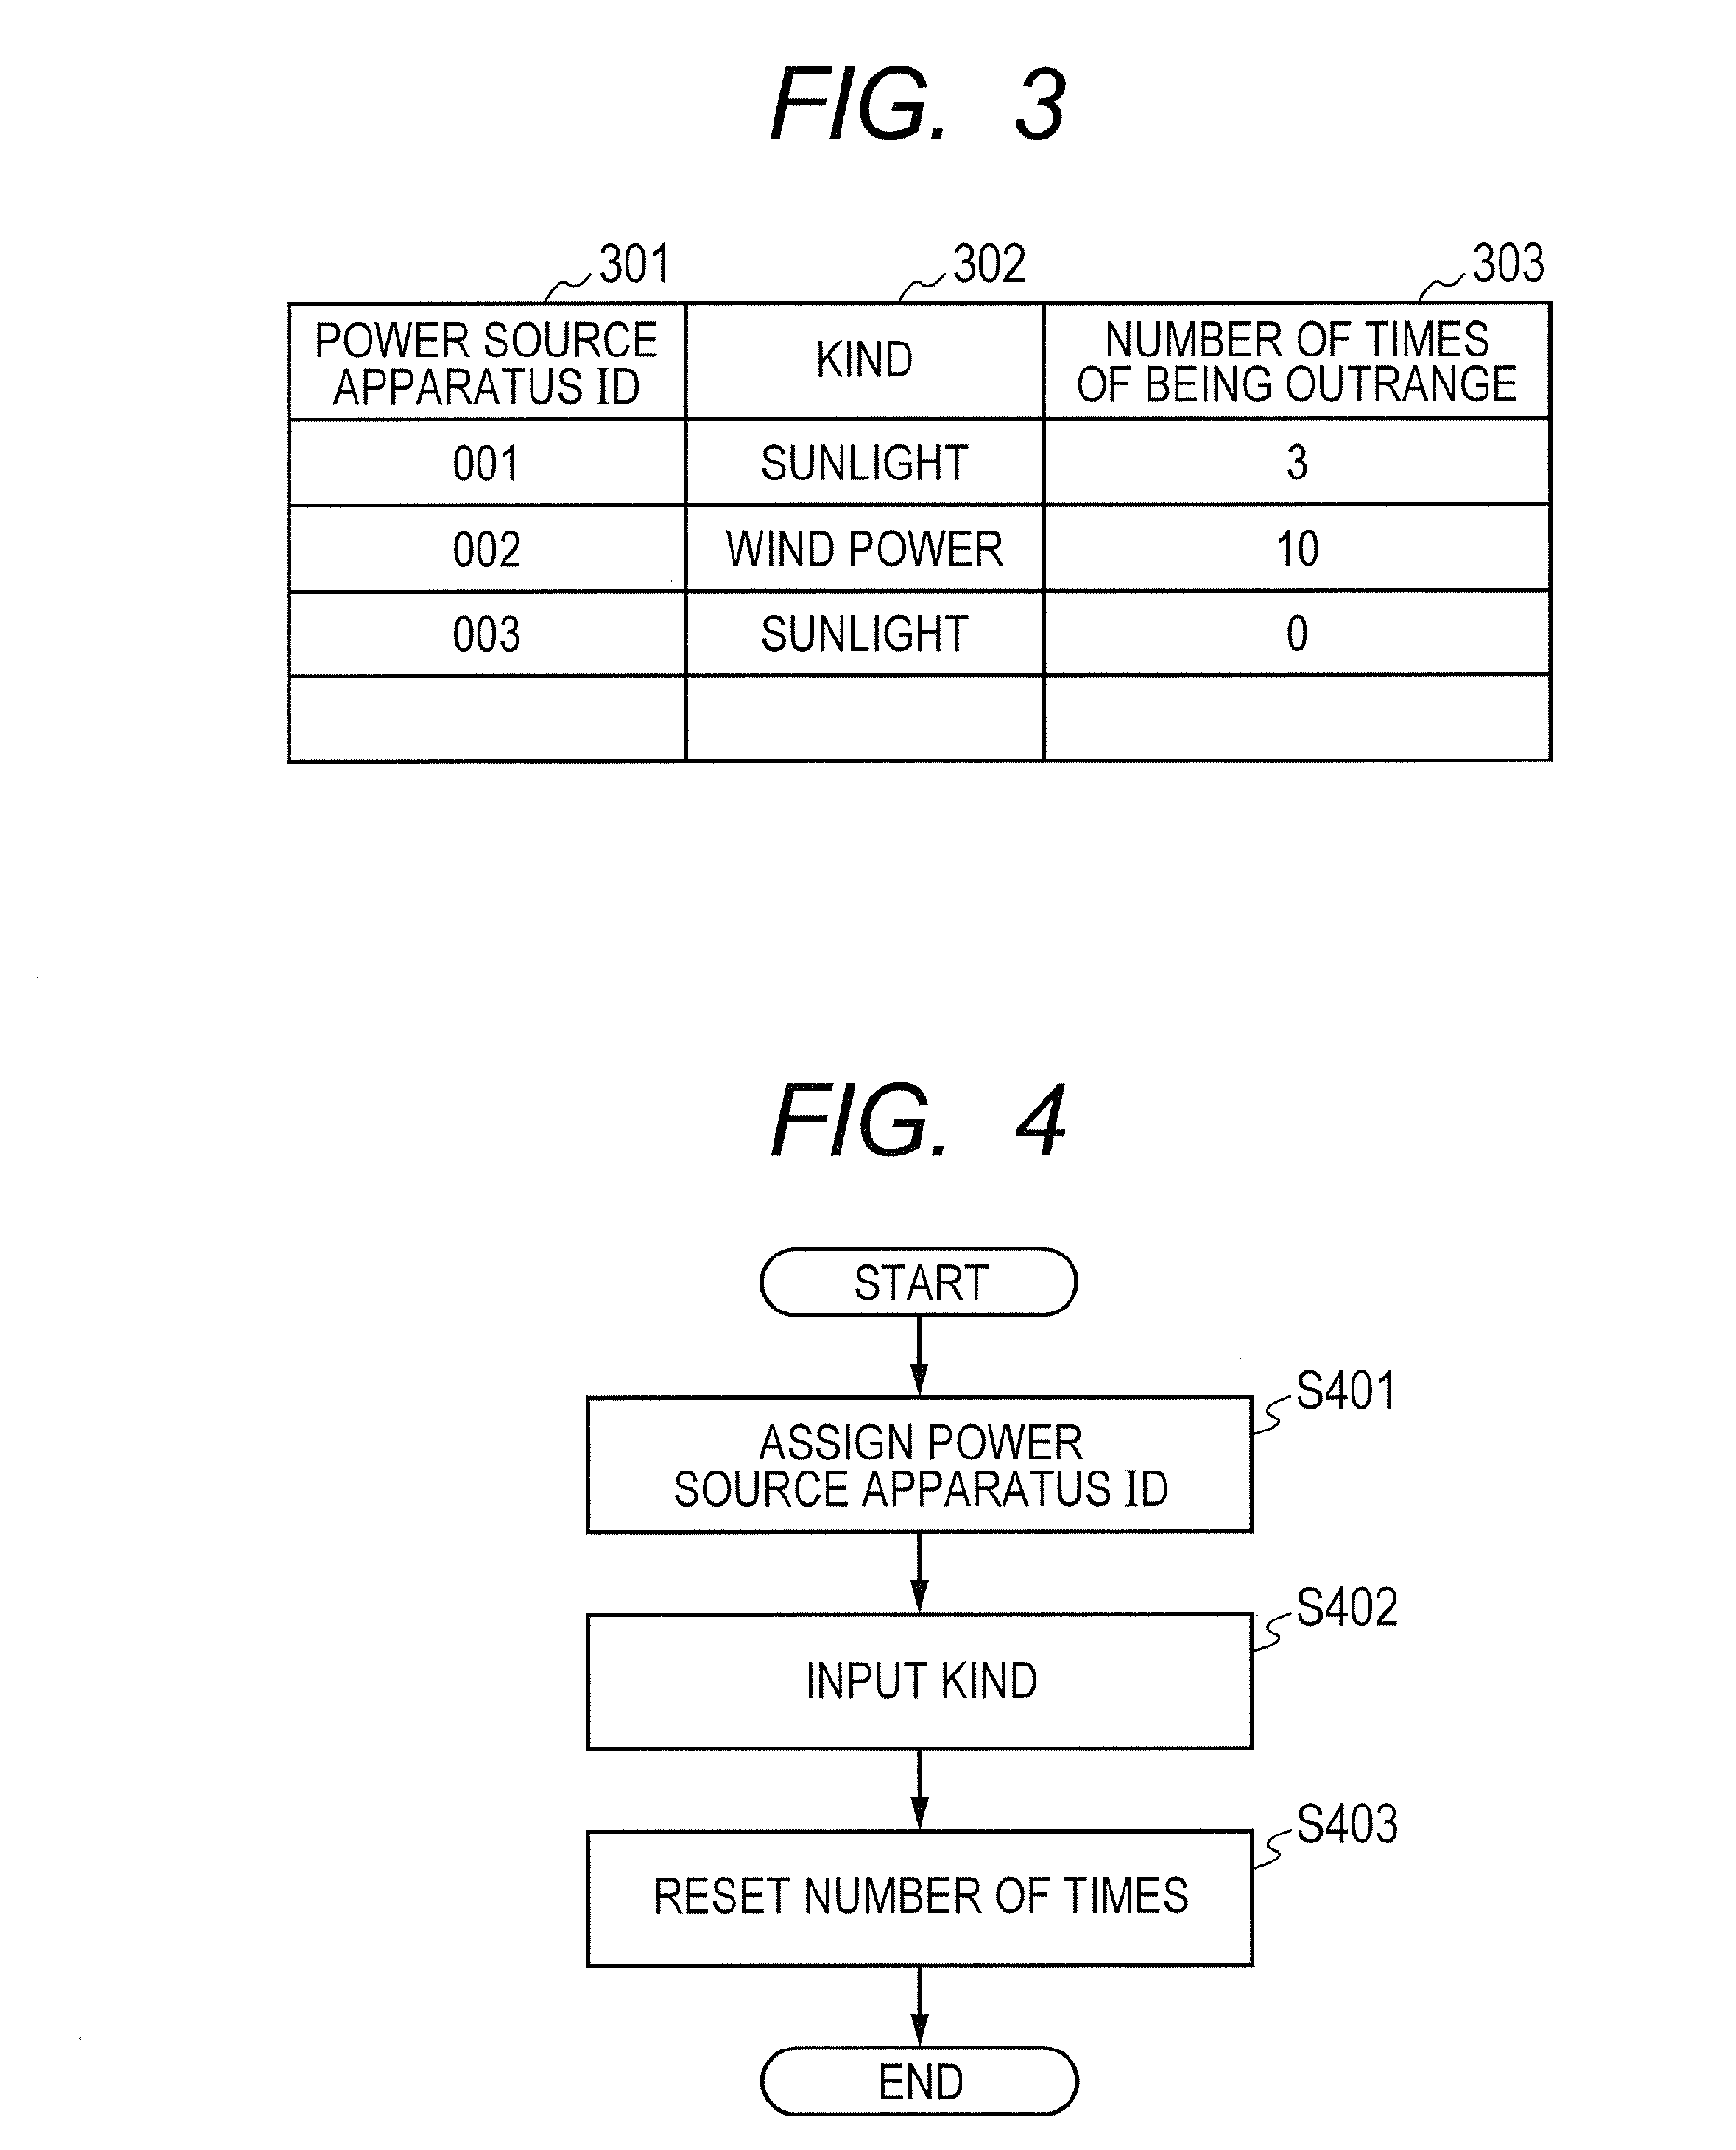 Power distribution system connecting apparatus